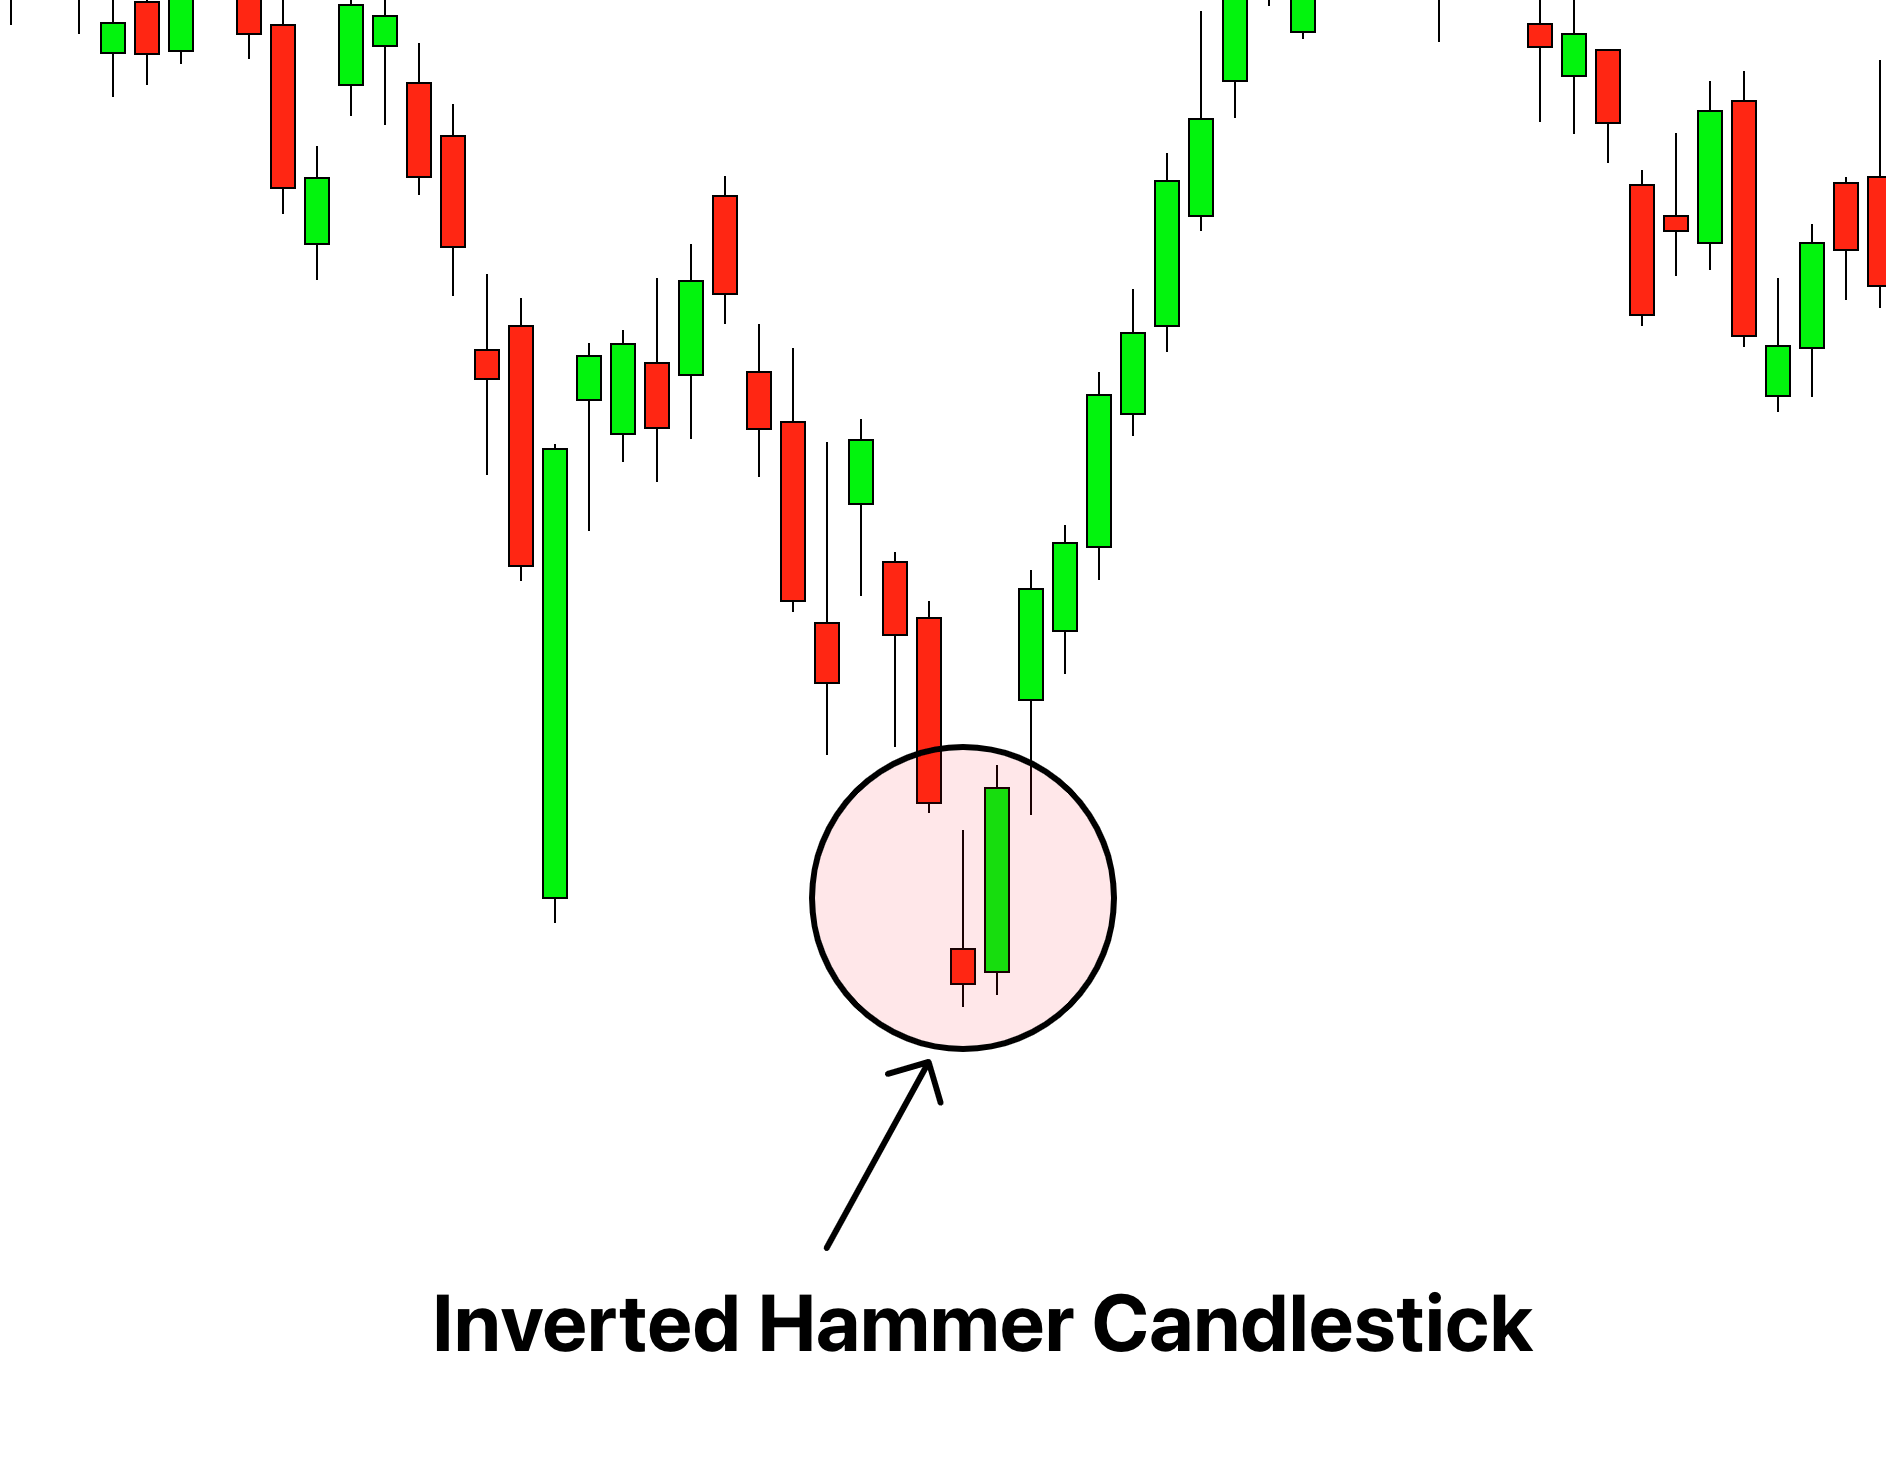 Inverted Hammer Candlestick Pattern PDF Guide - Trading PDF